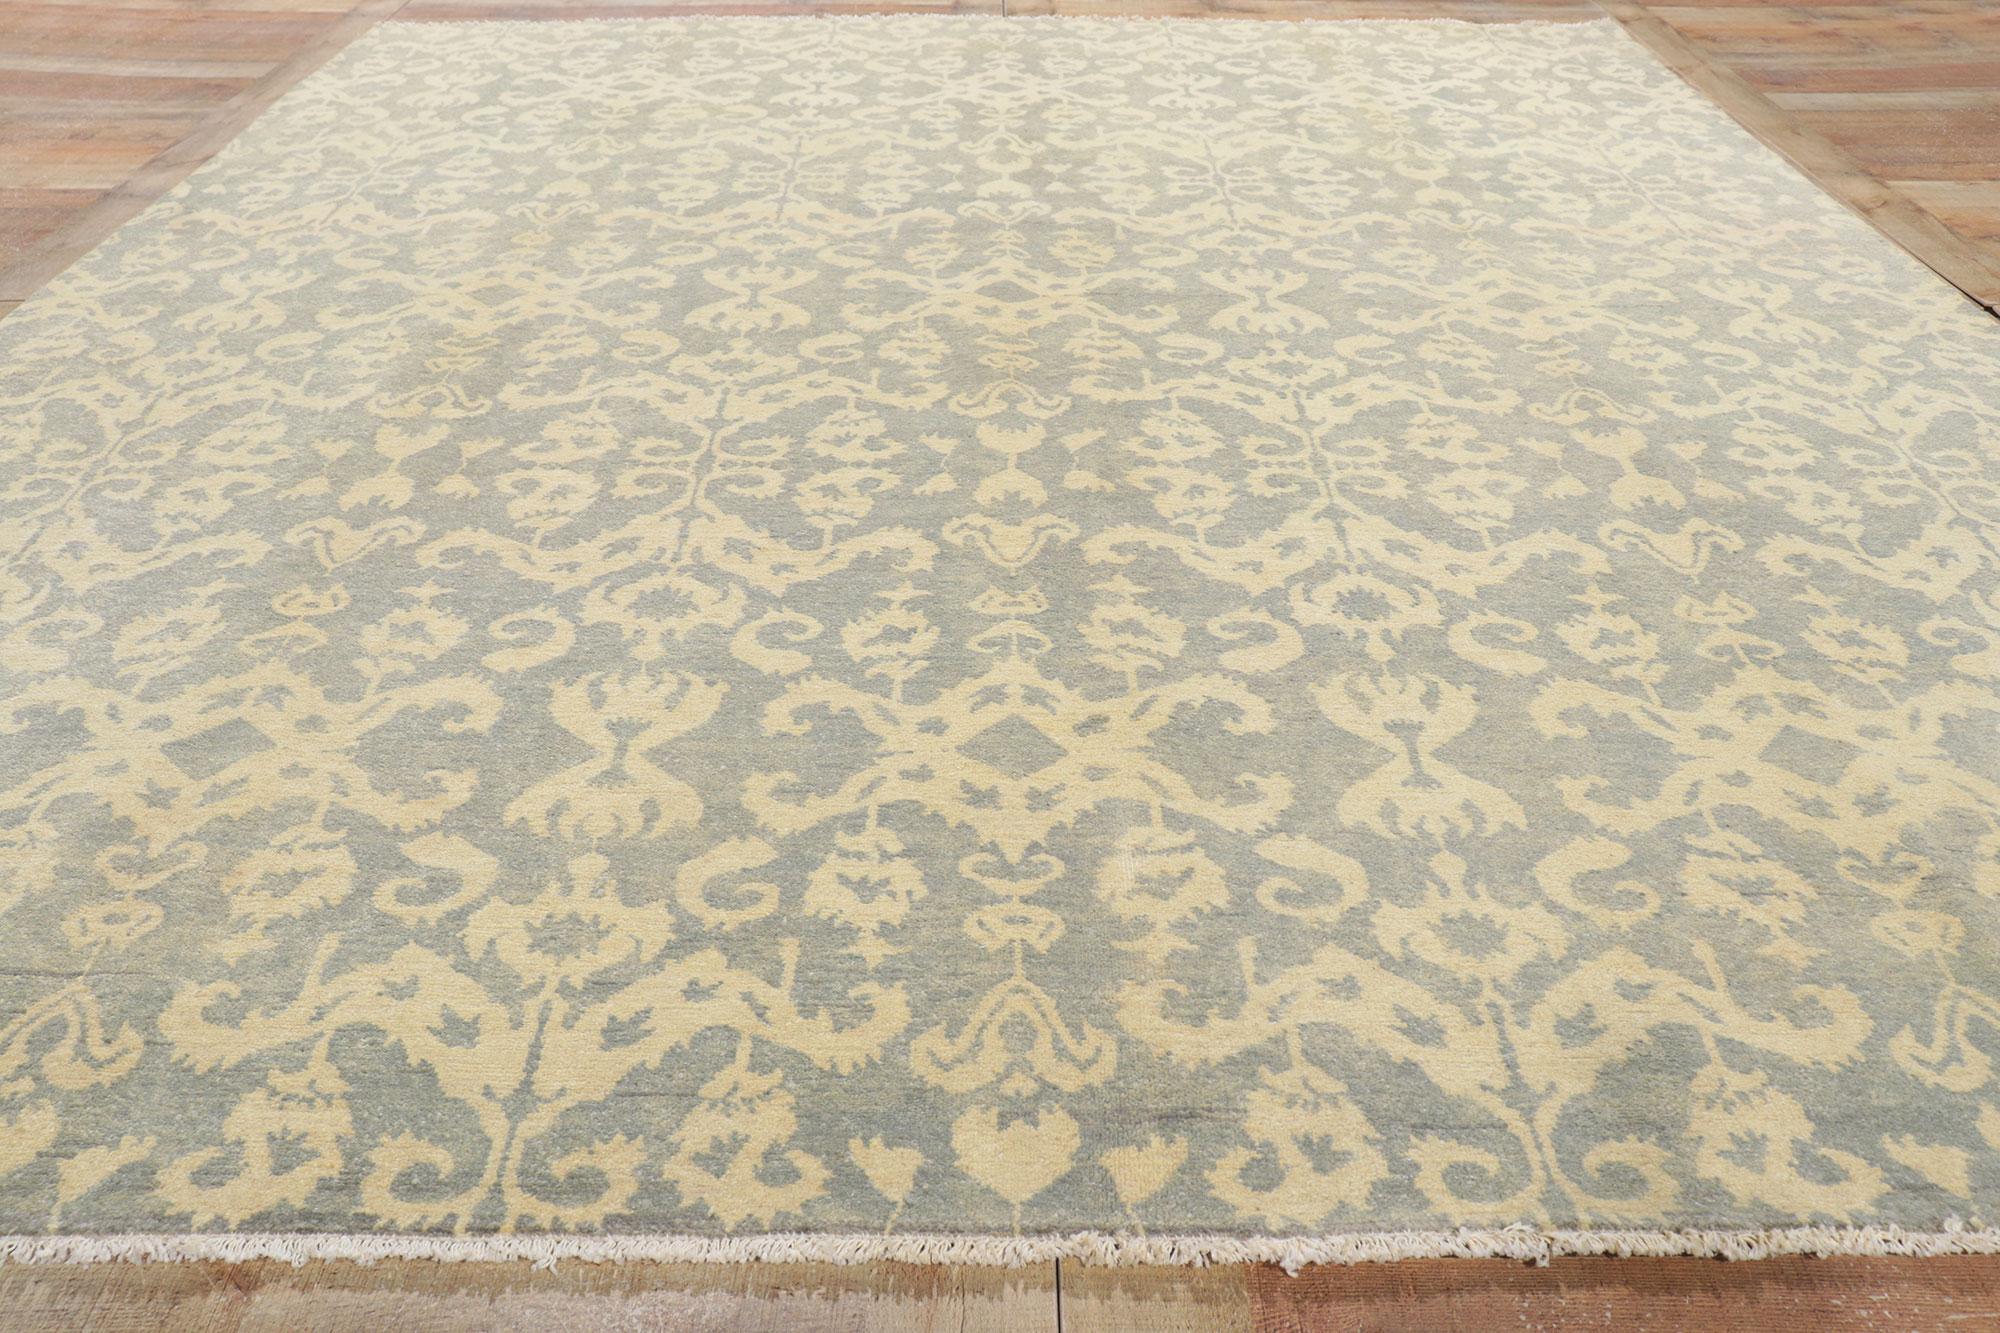 Wool New Transitional Ikat Area Rug with Soft Earth-Tone Colors For Sale